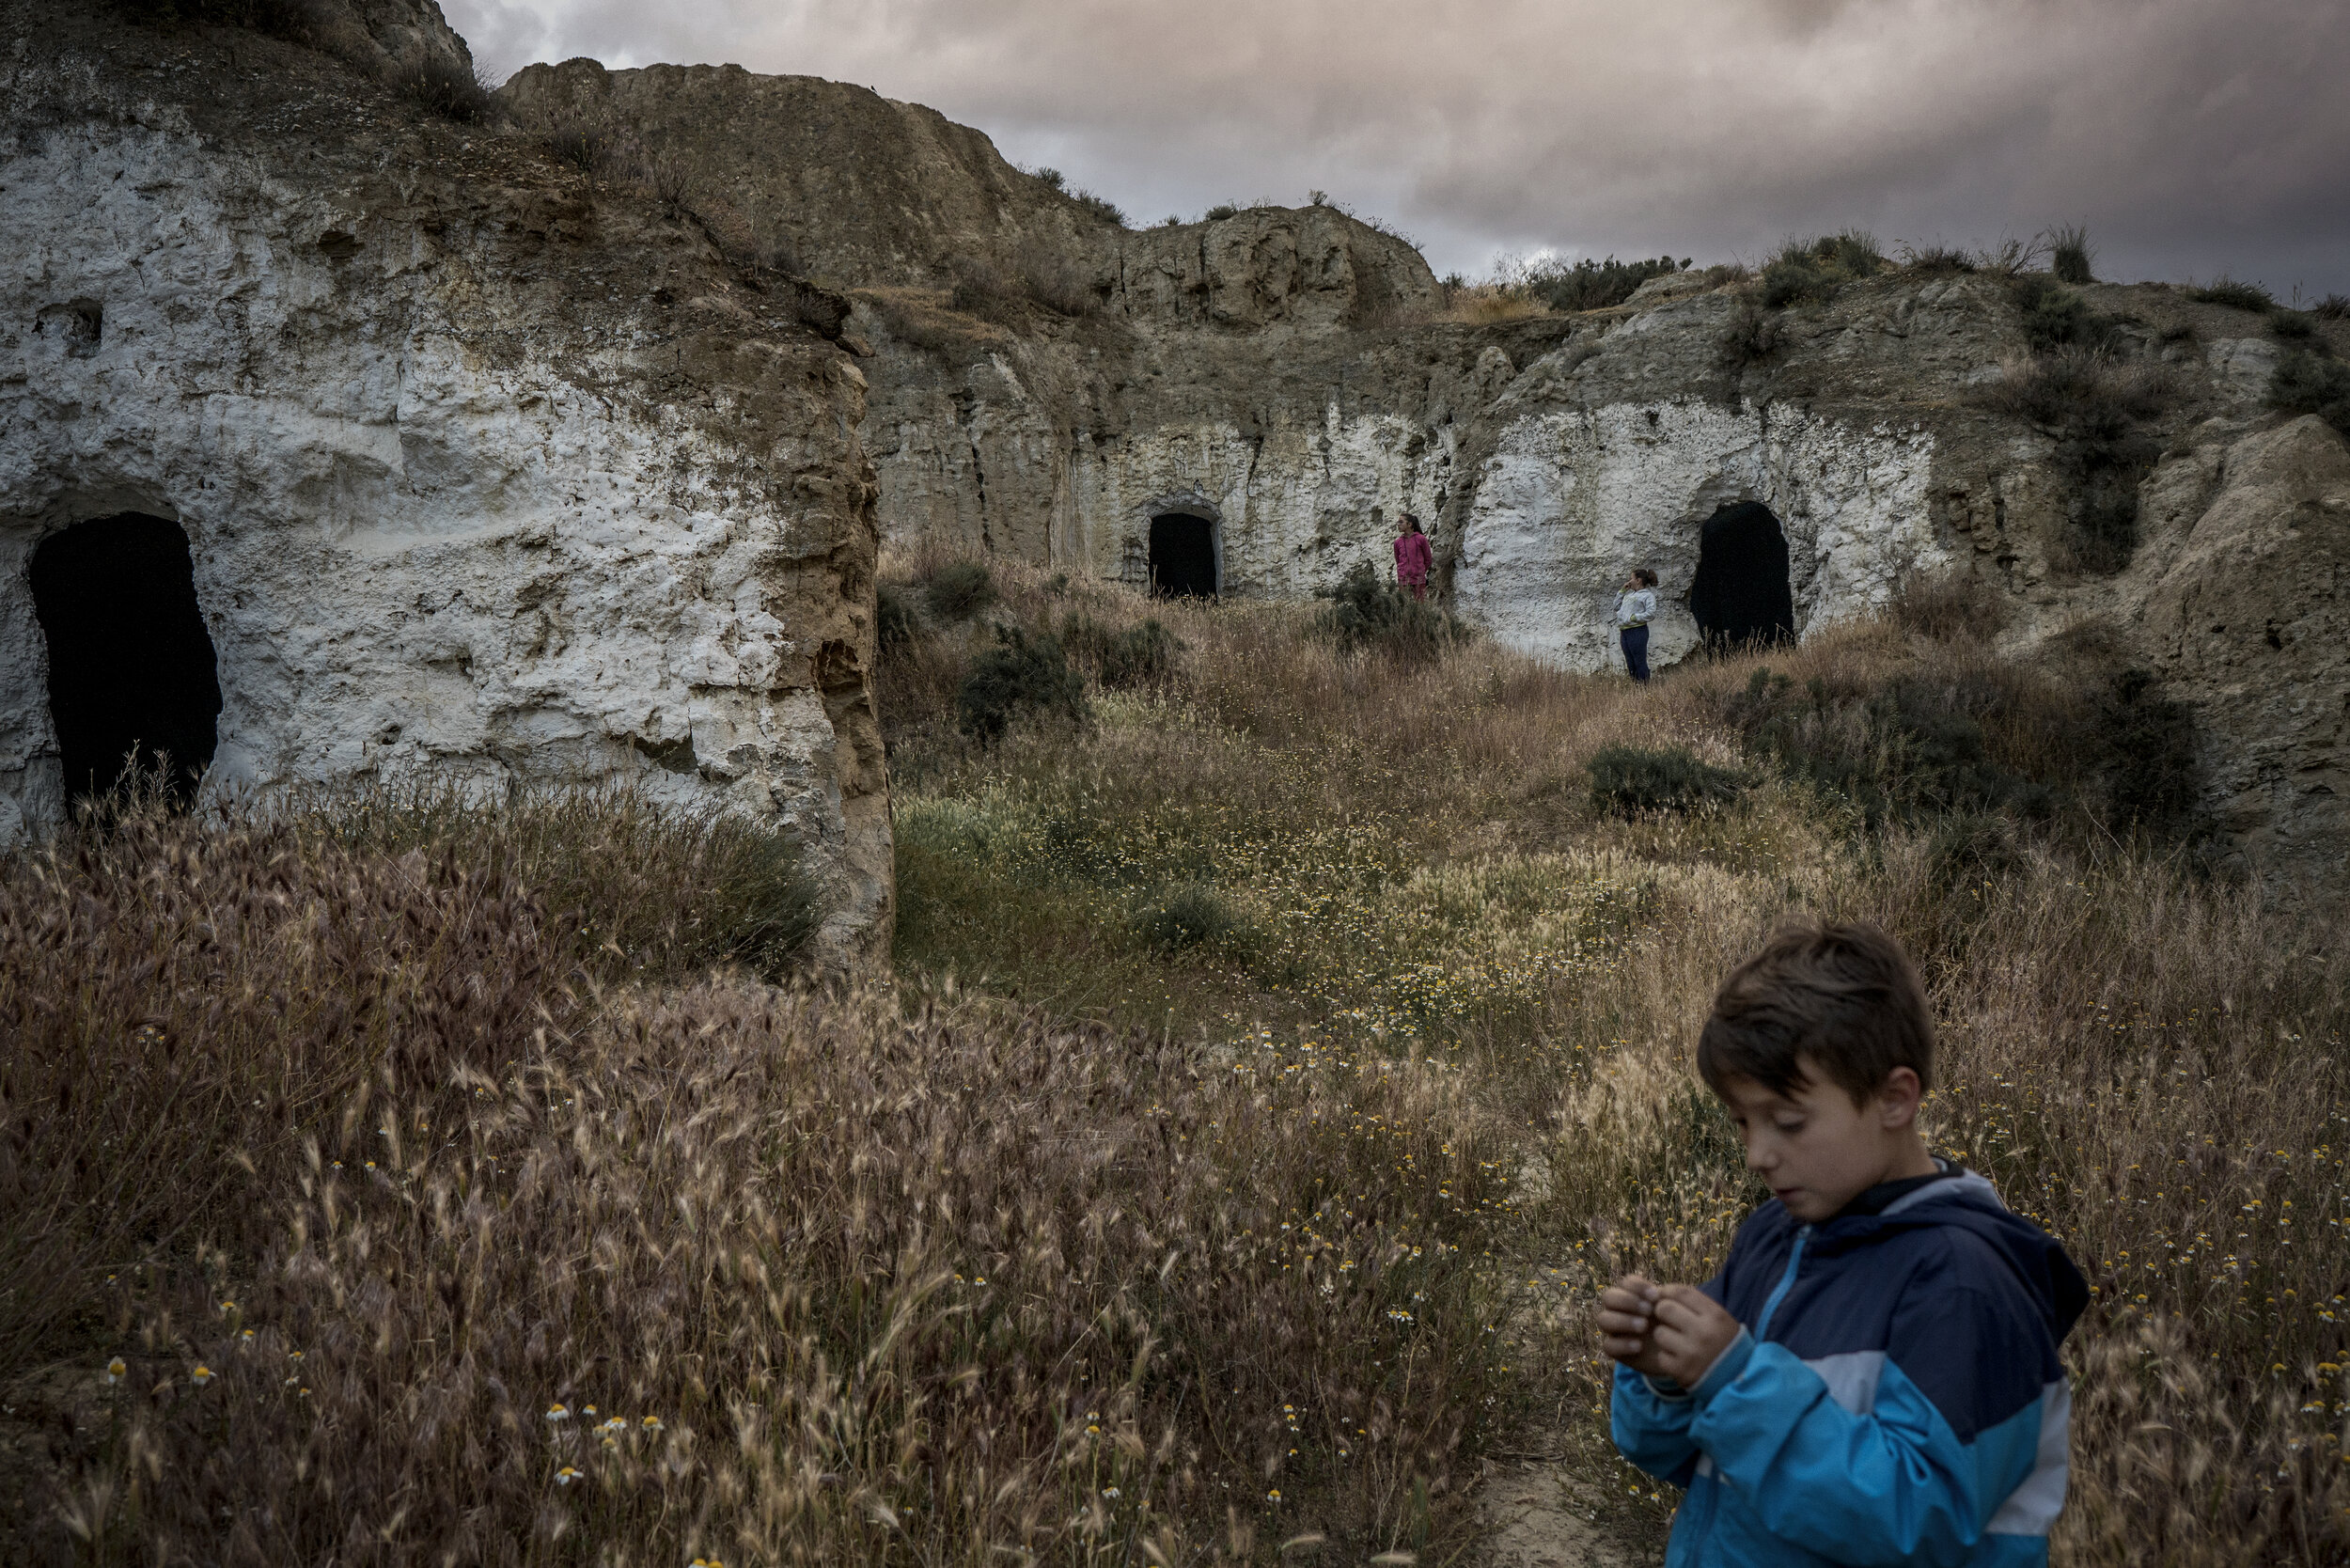  Children play in abandoned caves next to their own cave home.  © Tamara Merino  